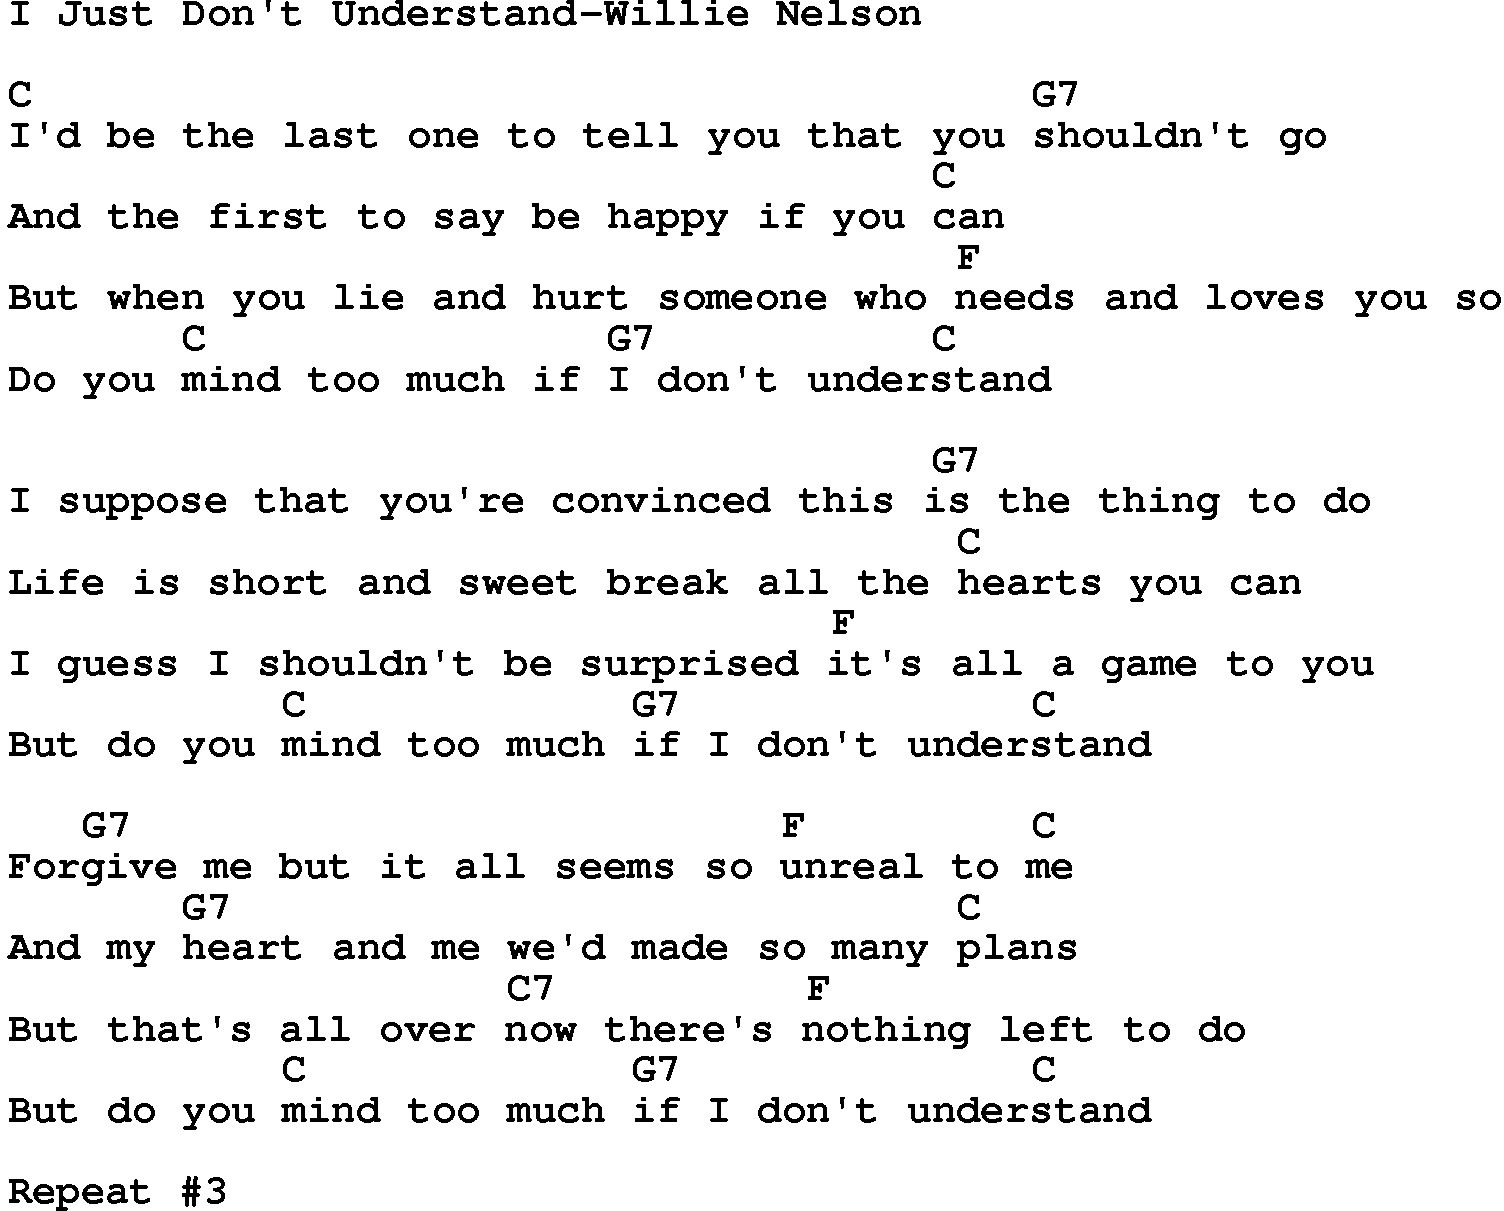 Country music song: I Just Don't Understand-Willie Nelson lyrics and chords